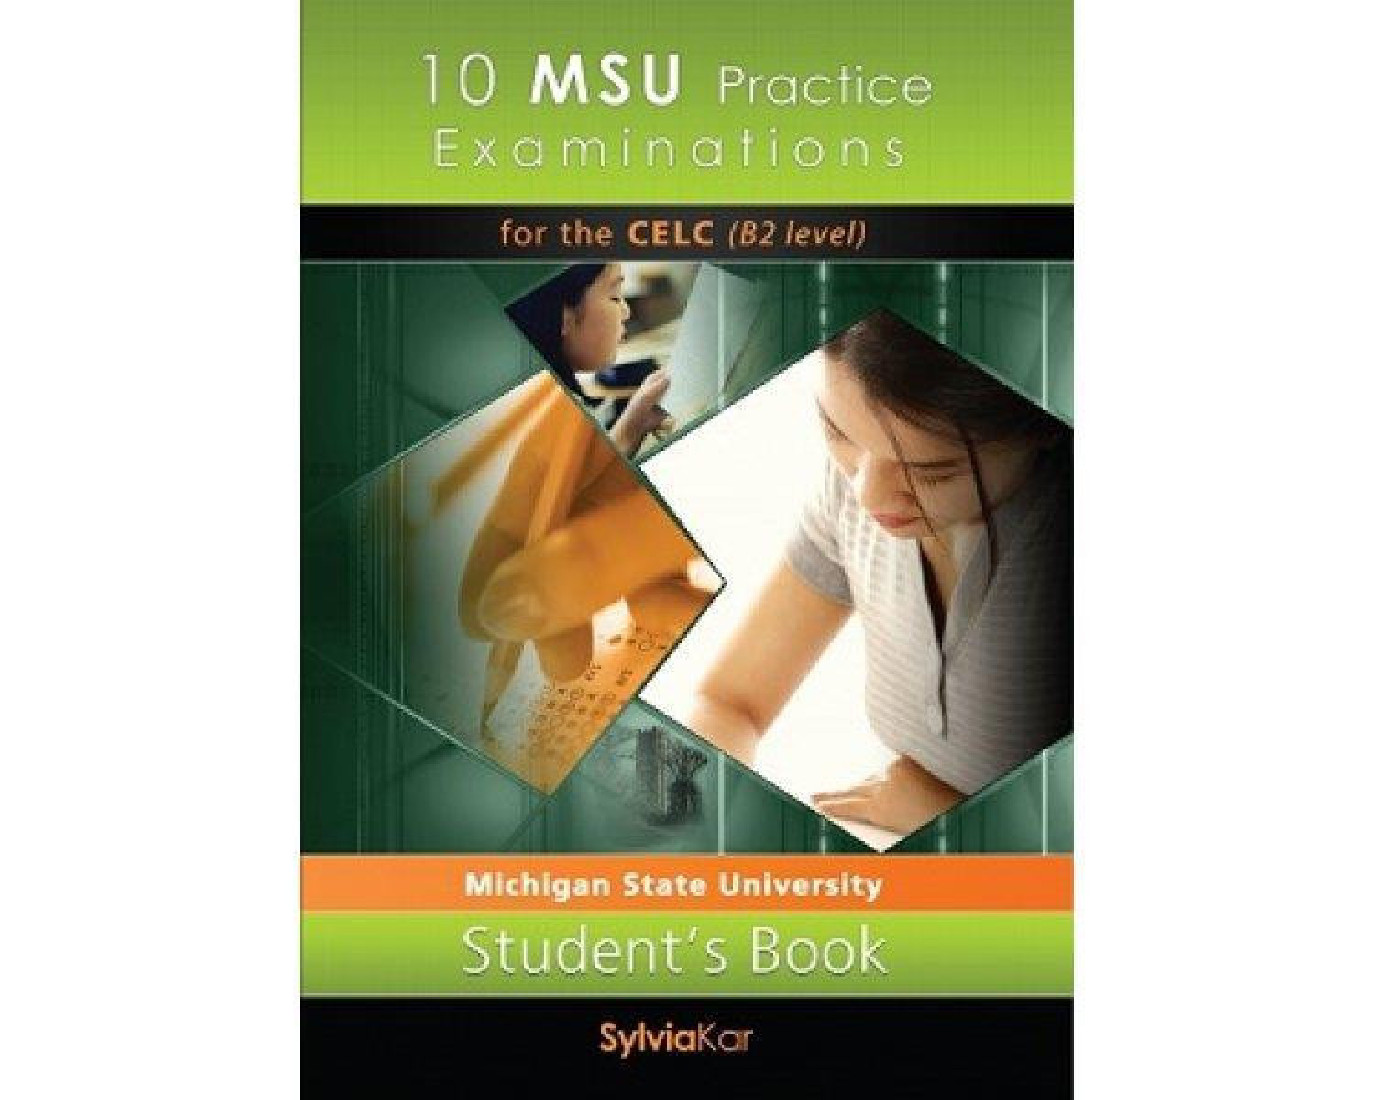 10 MSU PRACTICE EXAMINATIONS FOR THE CELC B2 TEACHERS BOOK